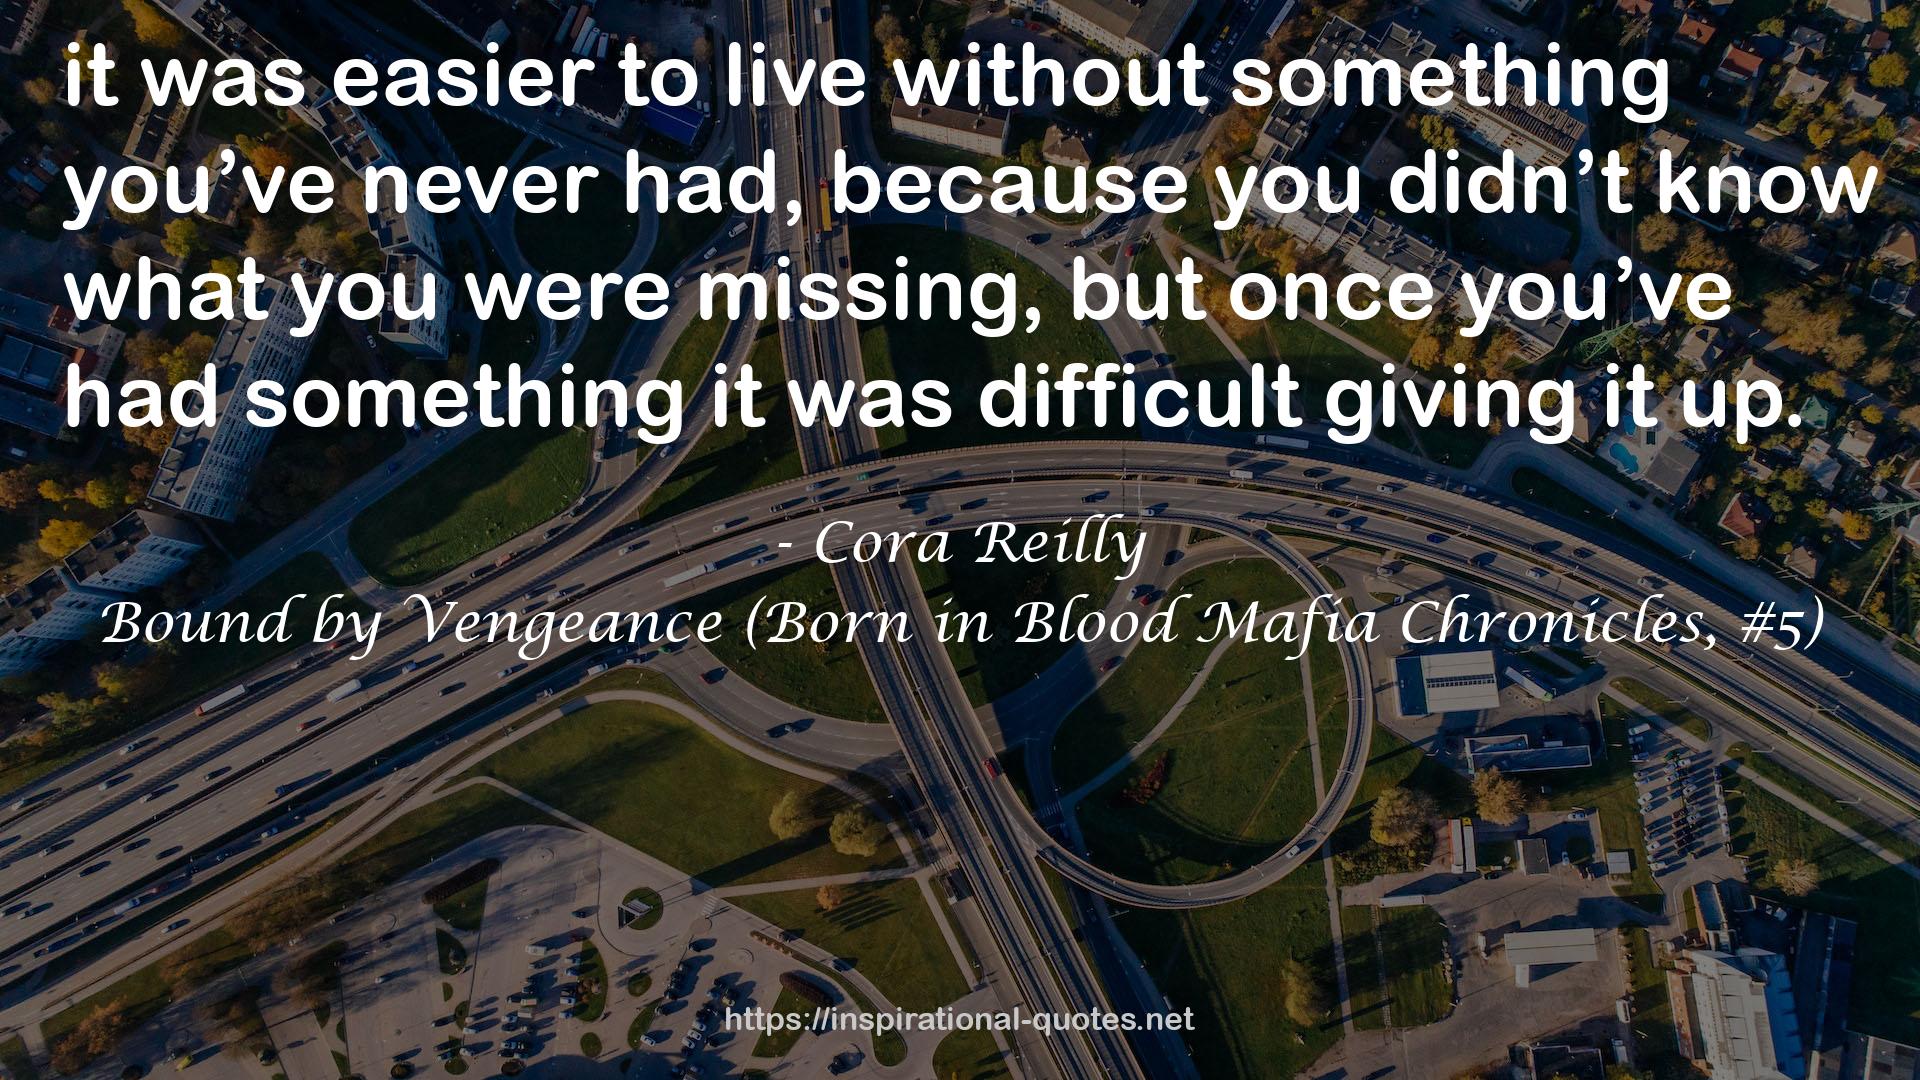 Bound by Vengeance (Born in Blood Mafia Chronicles, #5) QUOTES